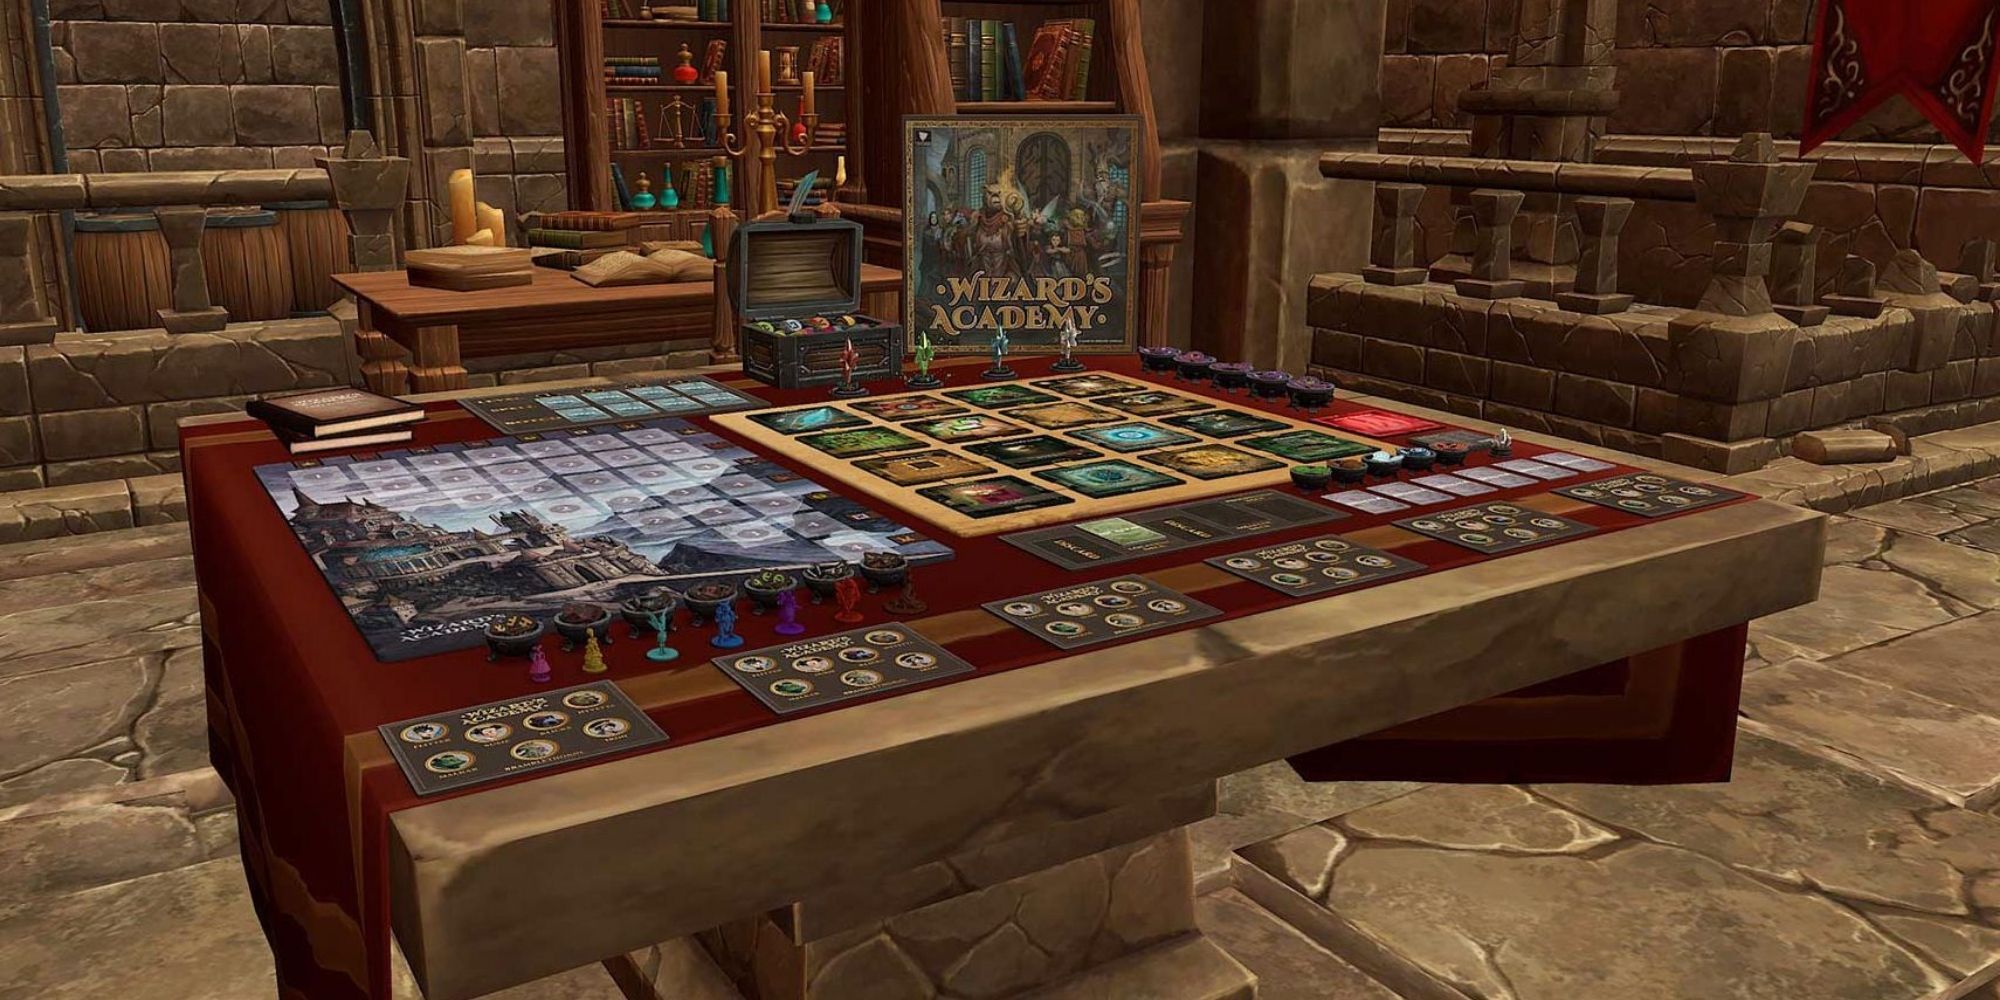 a screenshot of the wizards academy game set up on a digital table in a wizard's academy setting.